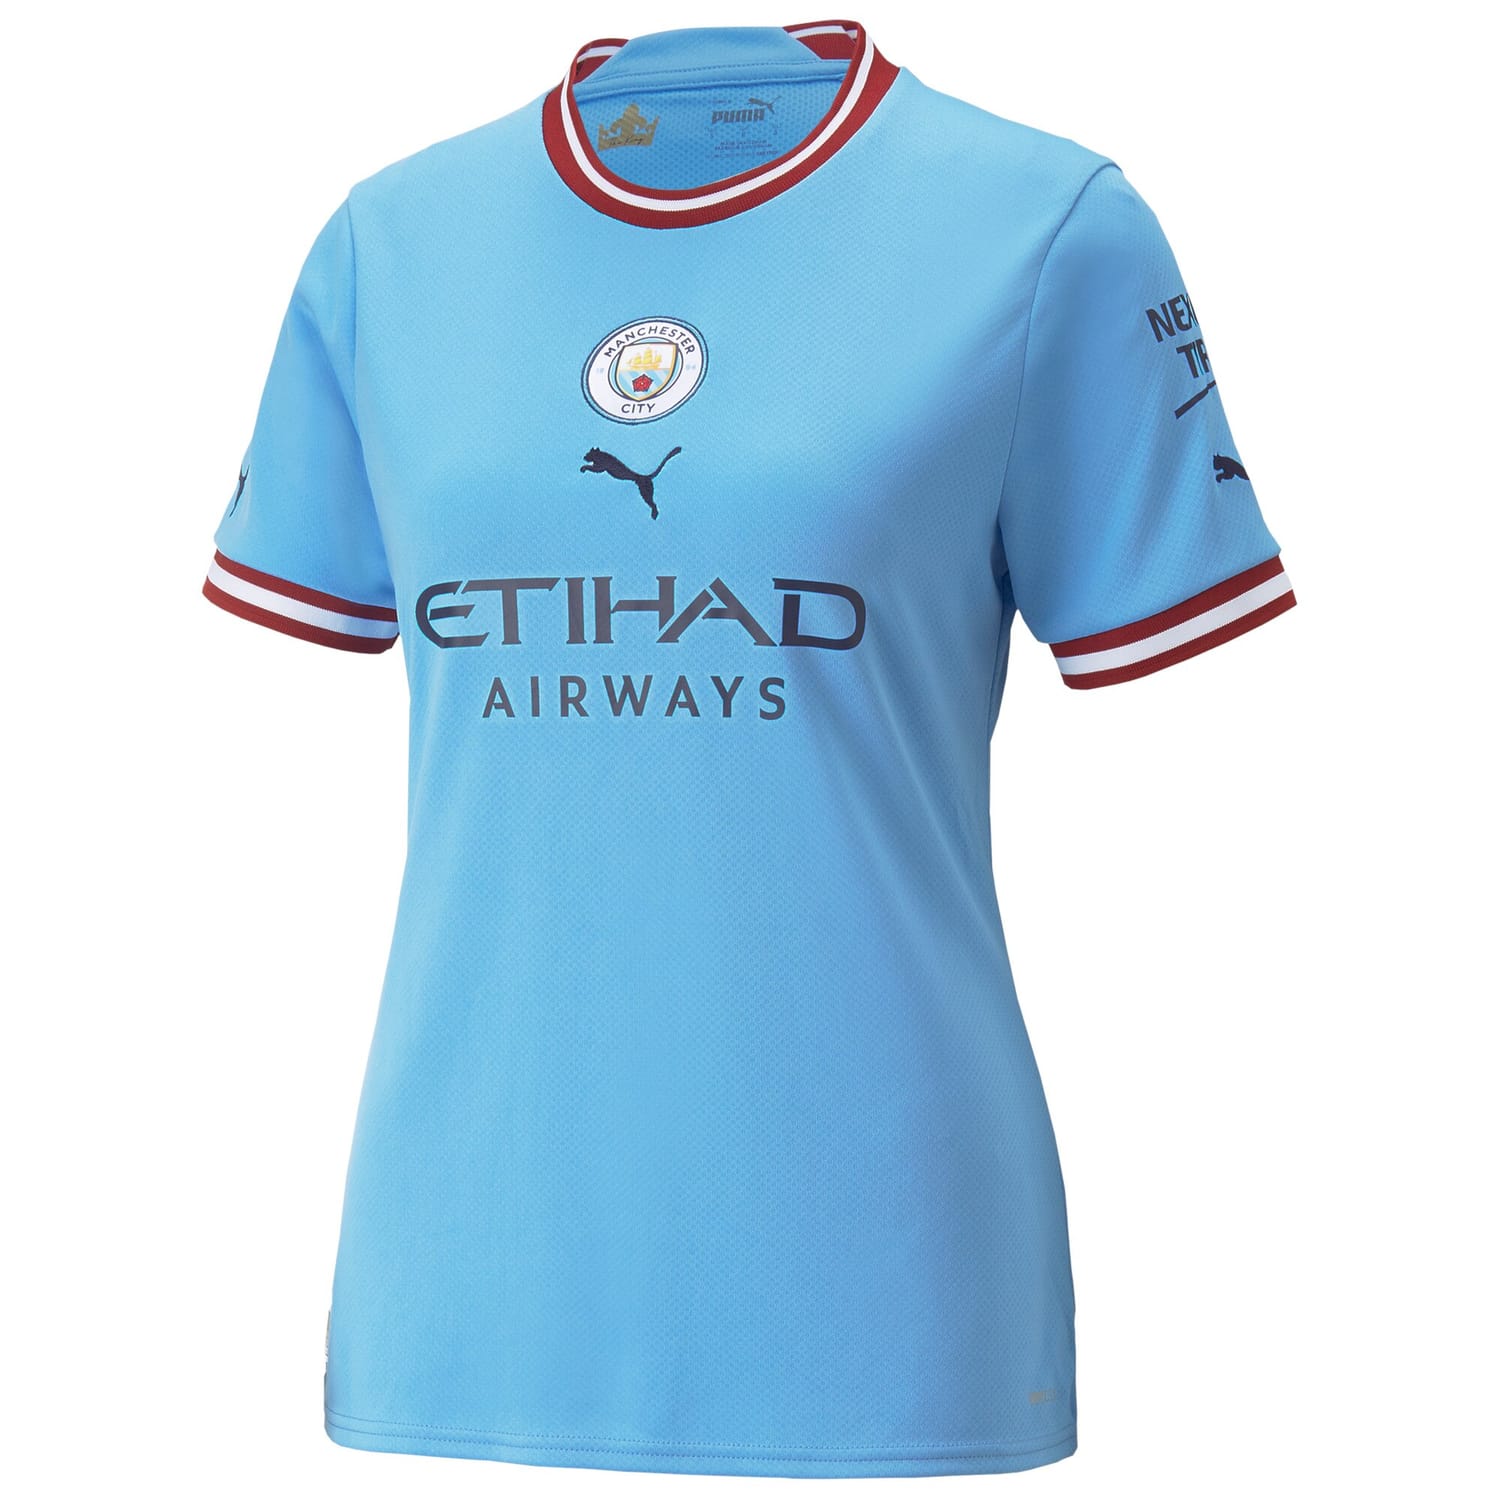 Premier League Champions Manchester City Home Jersey Shirt 2022-23 player Champions 22 printing for Women